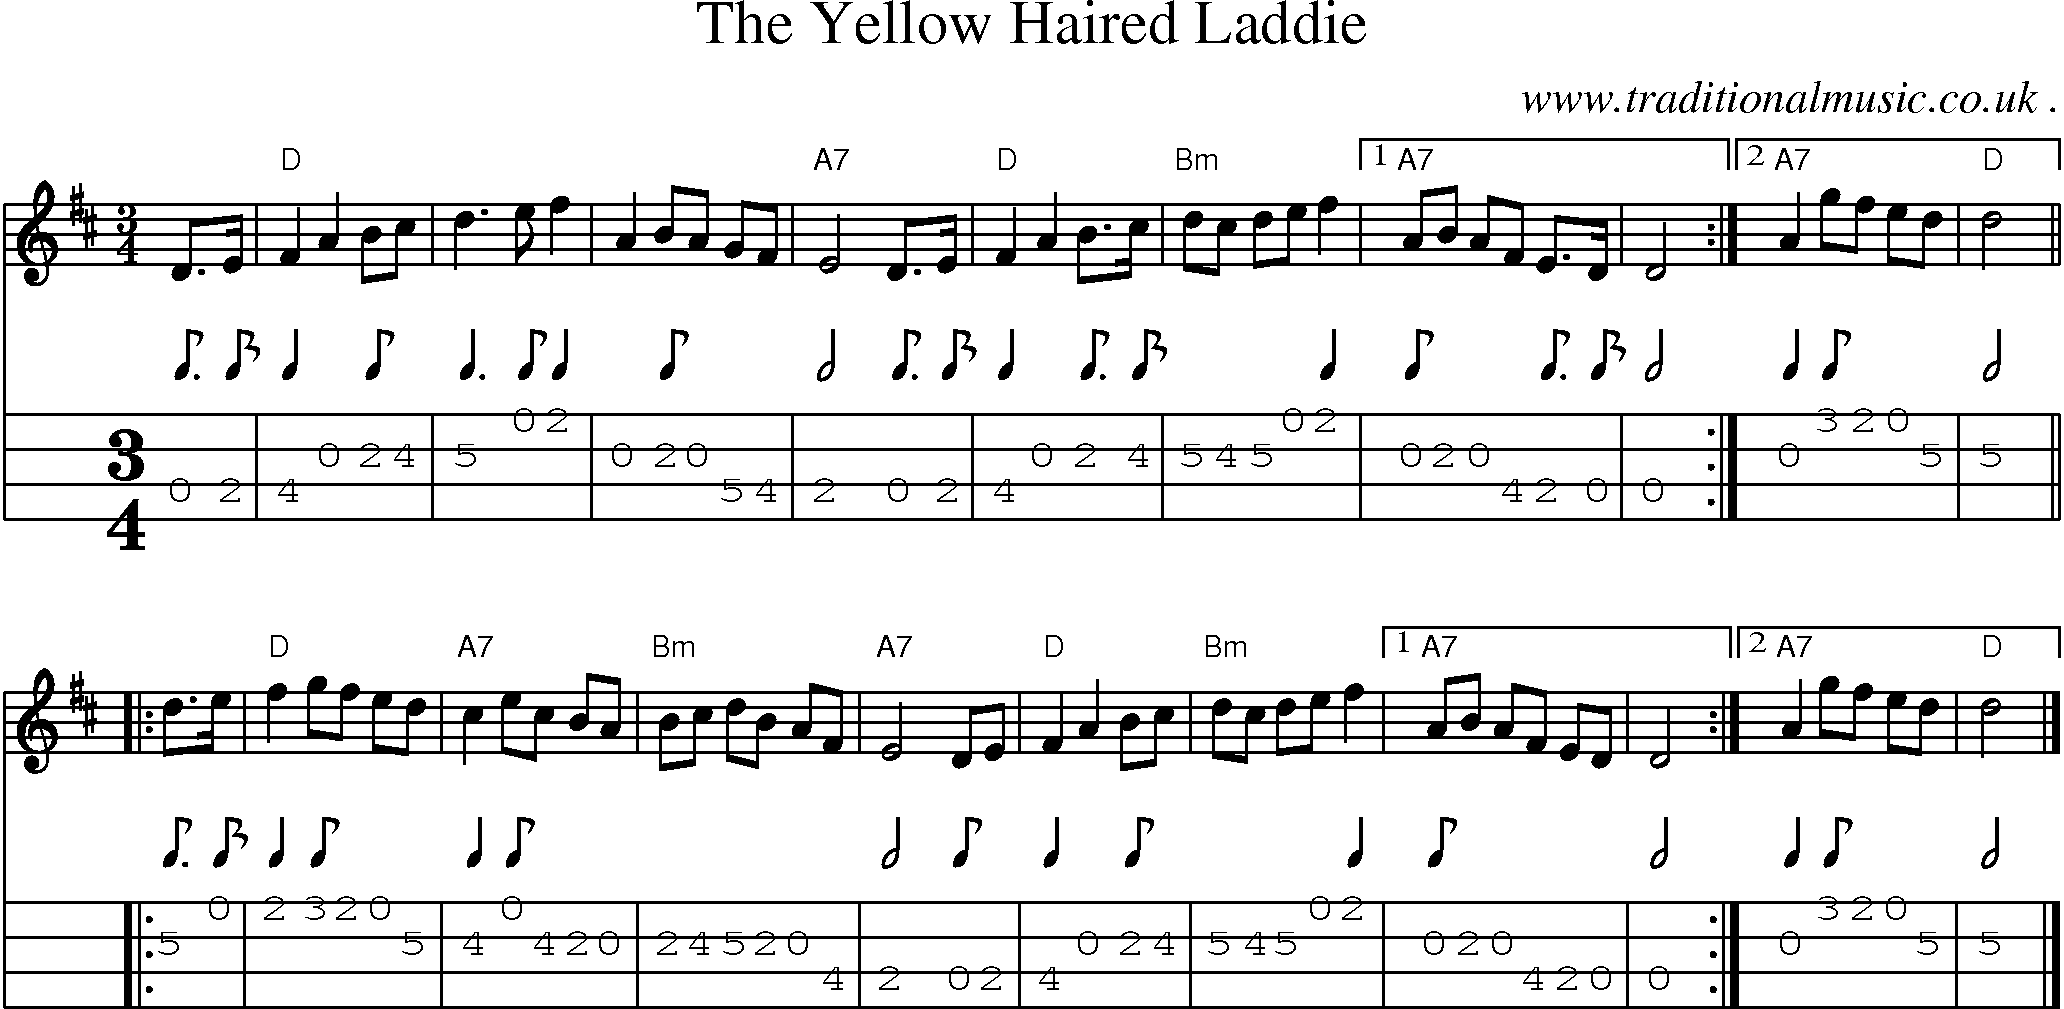 Sheet-music  score, Chords and Mandolin Tabs for The Yellow Haired Laddie